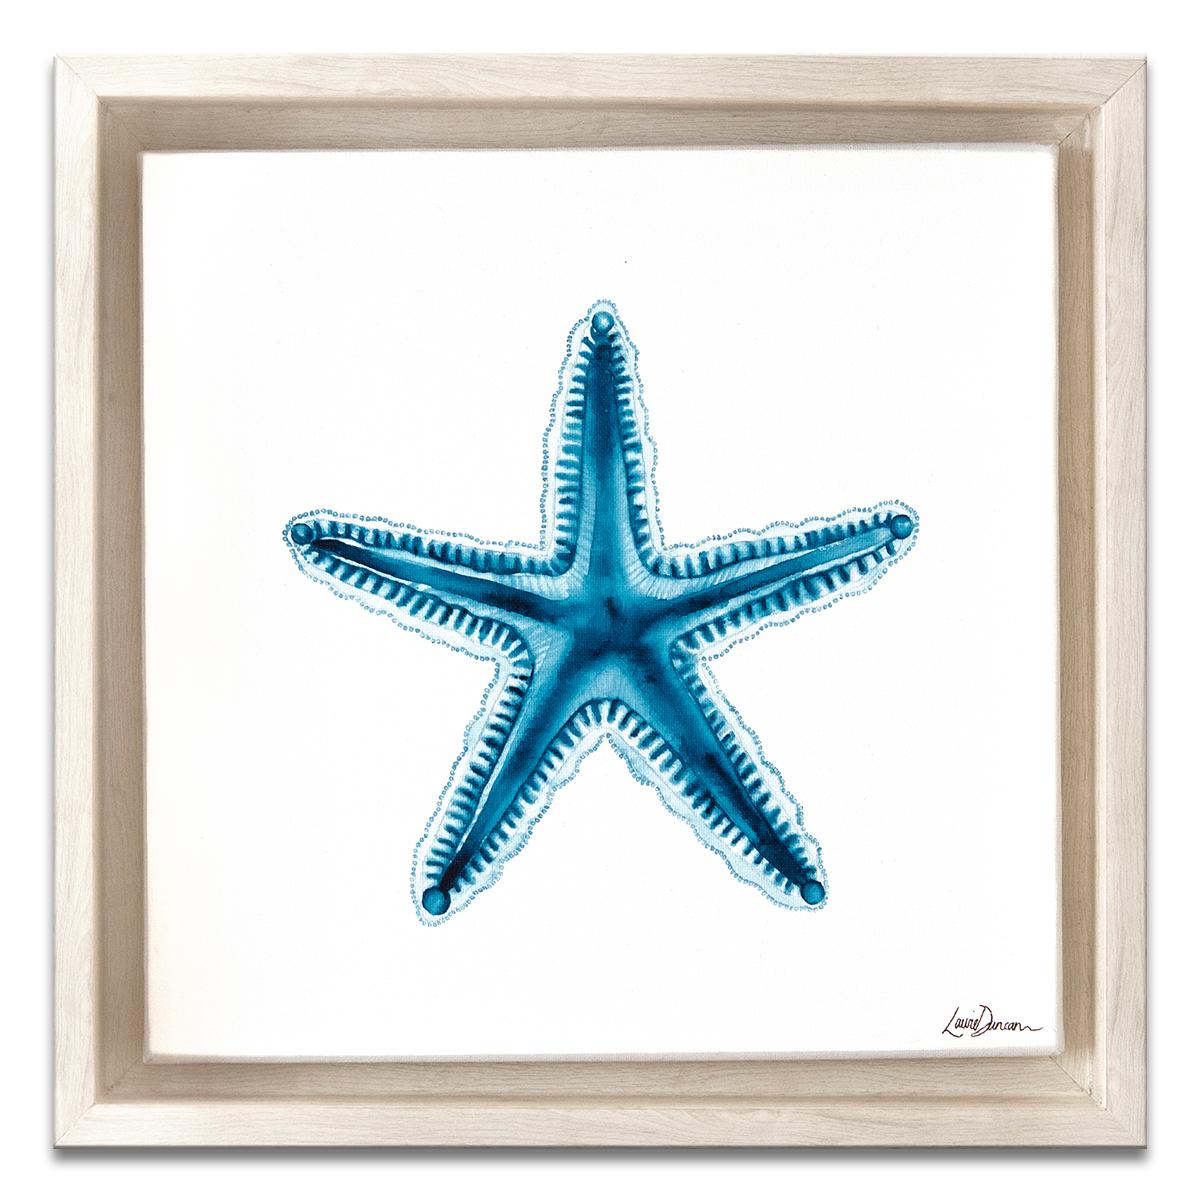 ‘Ocean Star' Framed Canvas Original Painting features a starfish marine life in vibrant tones of blue, and white. The epitome of coastal sophistication, Laurie Duncan’s watercolor masterpieces are so intricately articulated they appear tangible. A